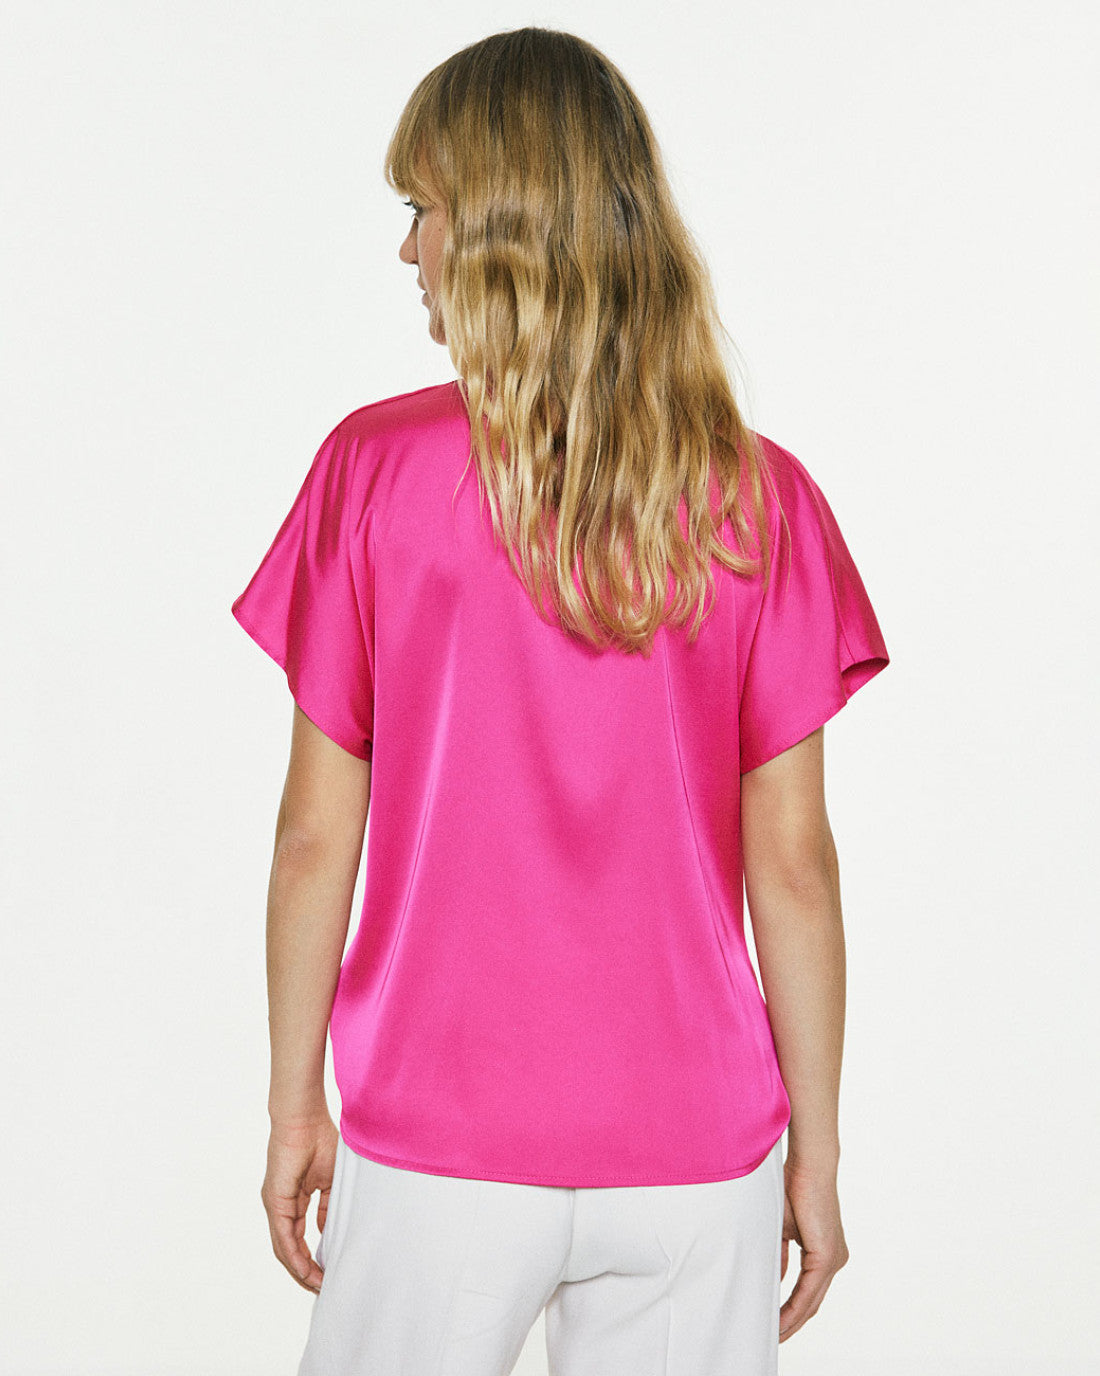 Dropped Blouse - Pink (Size 8)